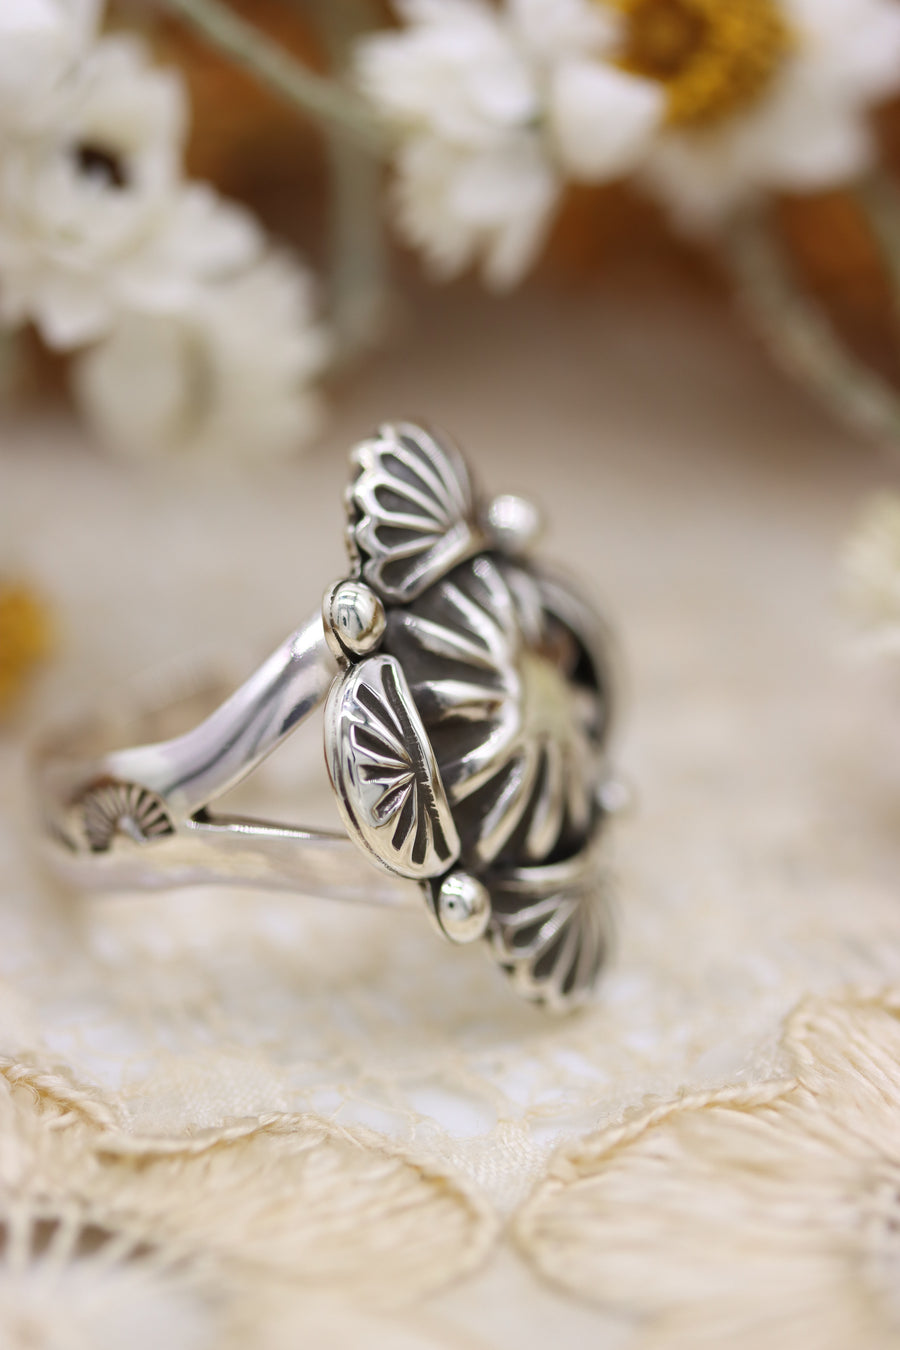 The Celestial Ring (size 8)